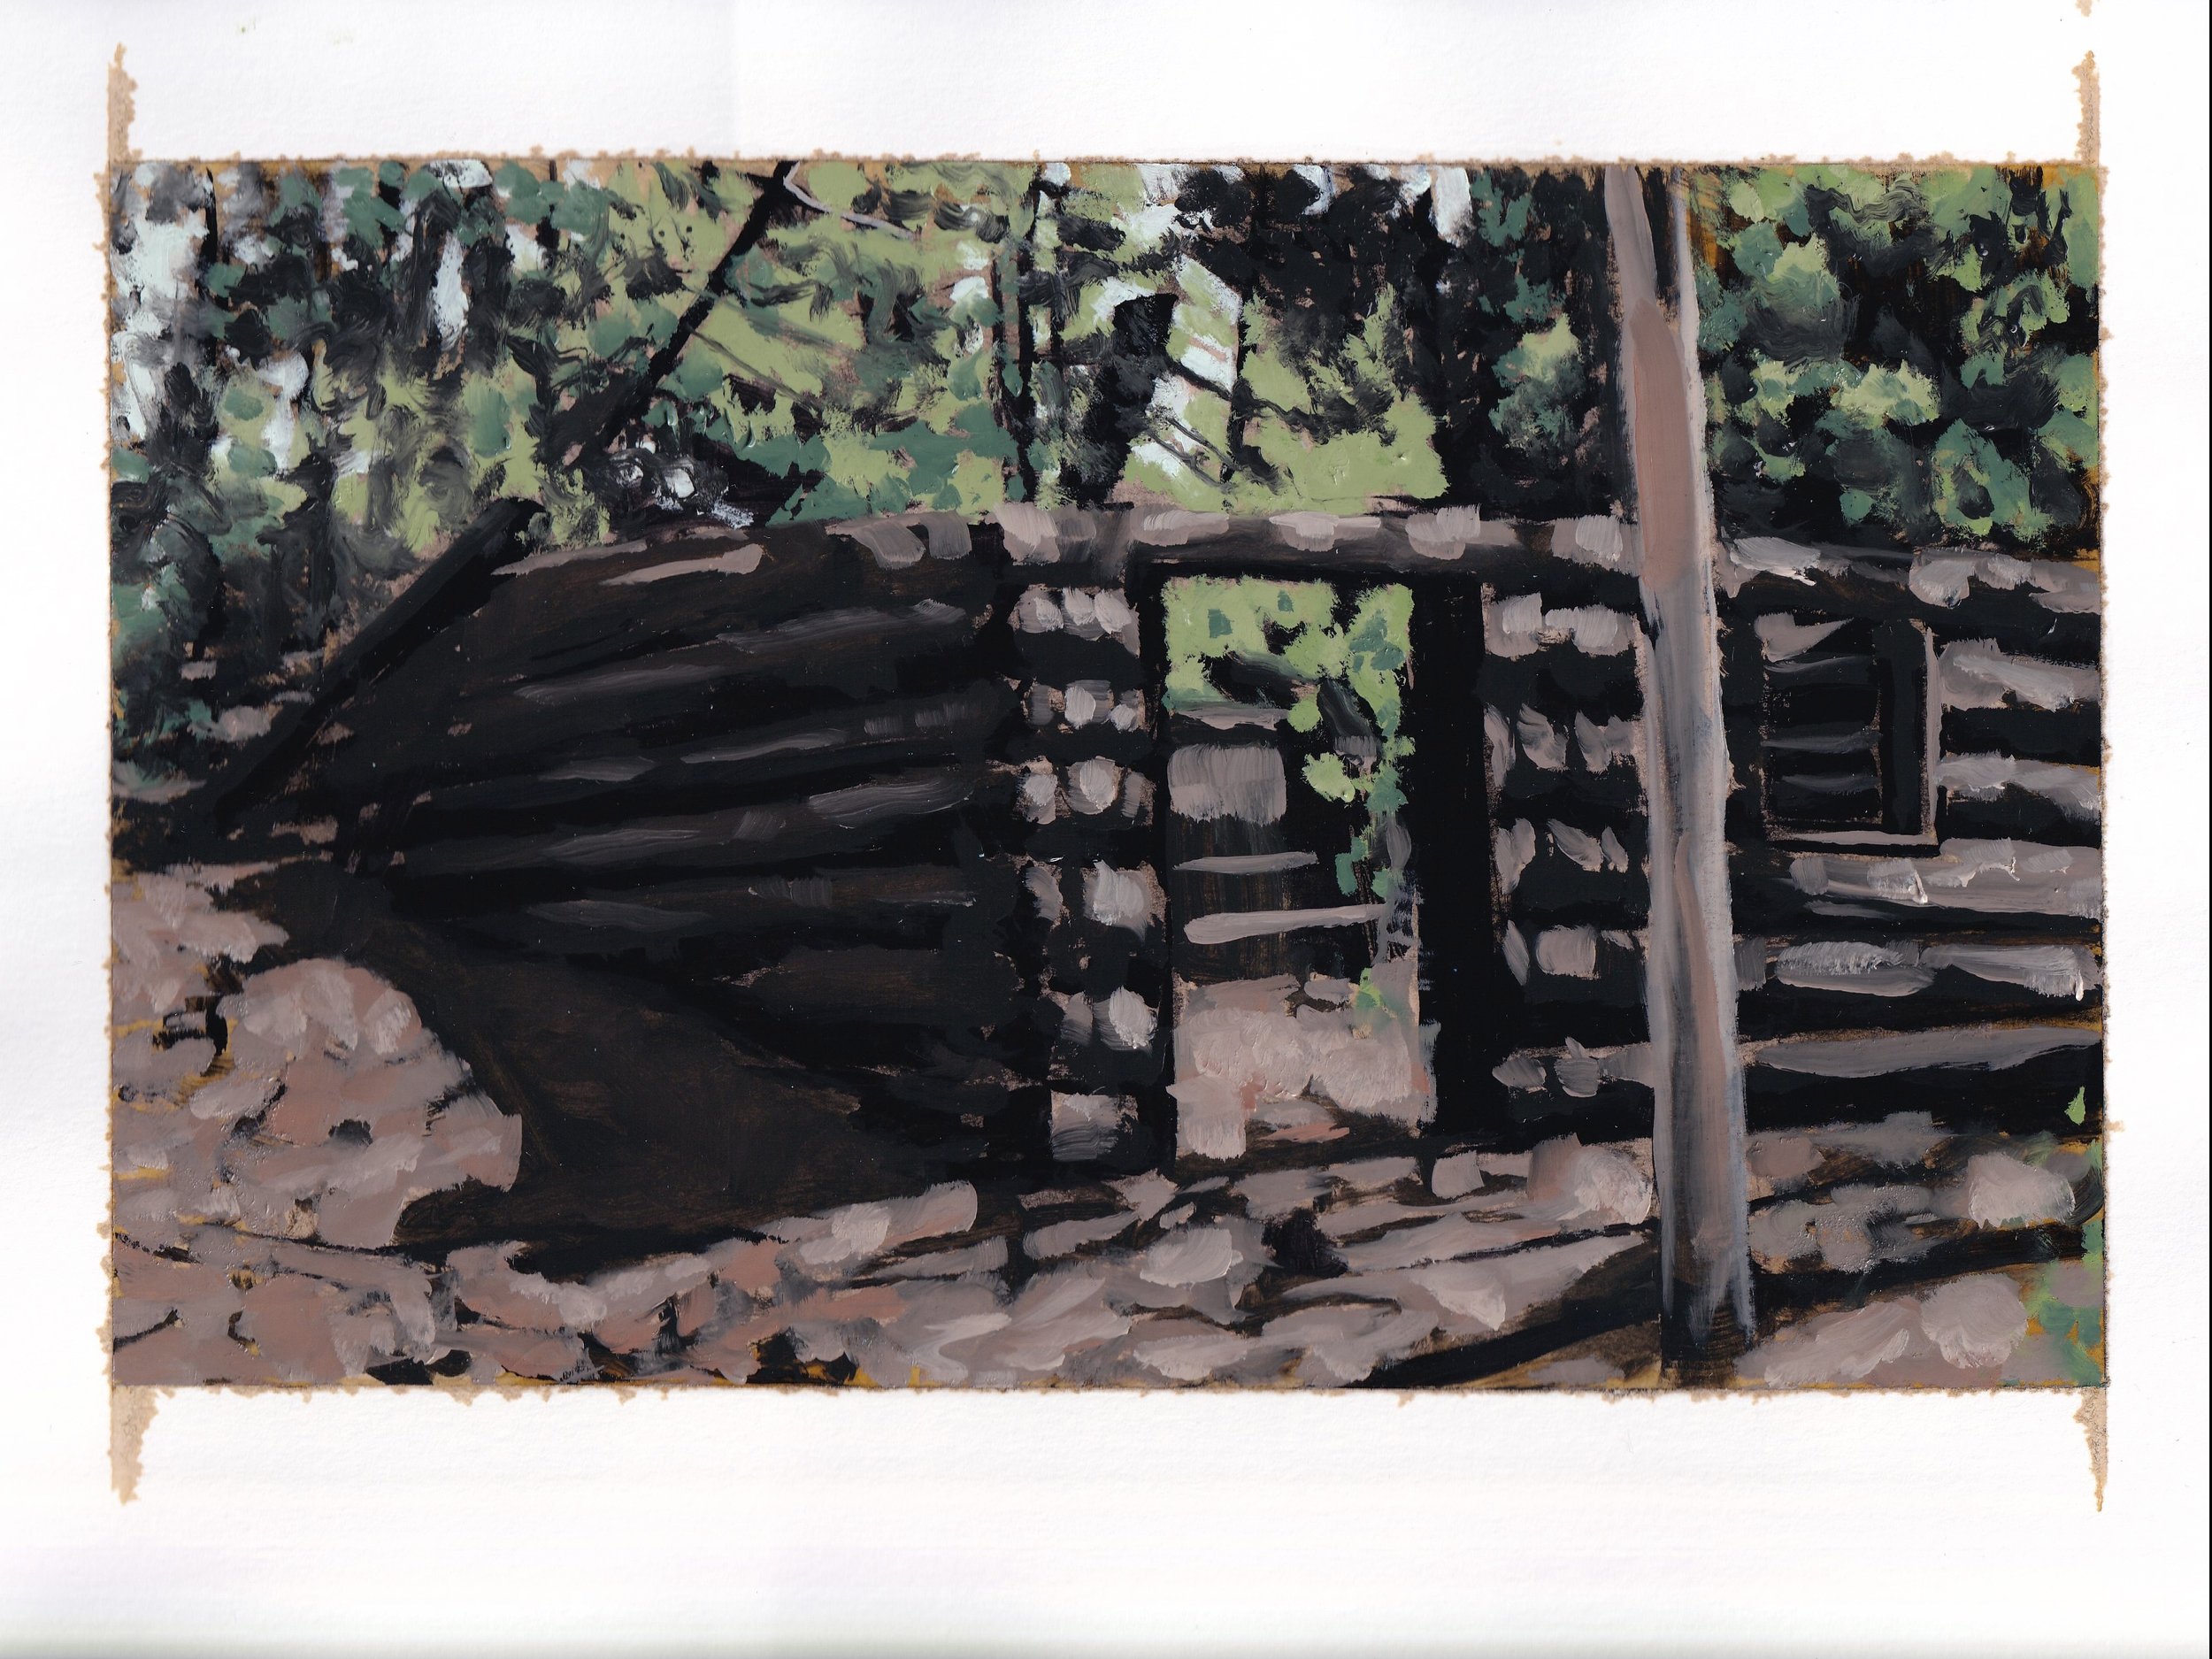  cabin in the woods - 9” x 12” - 2021 - charcoal, amber shellac, and oil paint on paper 